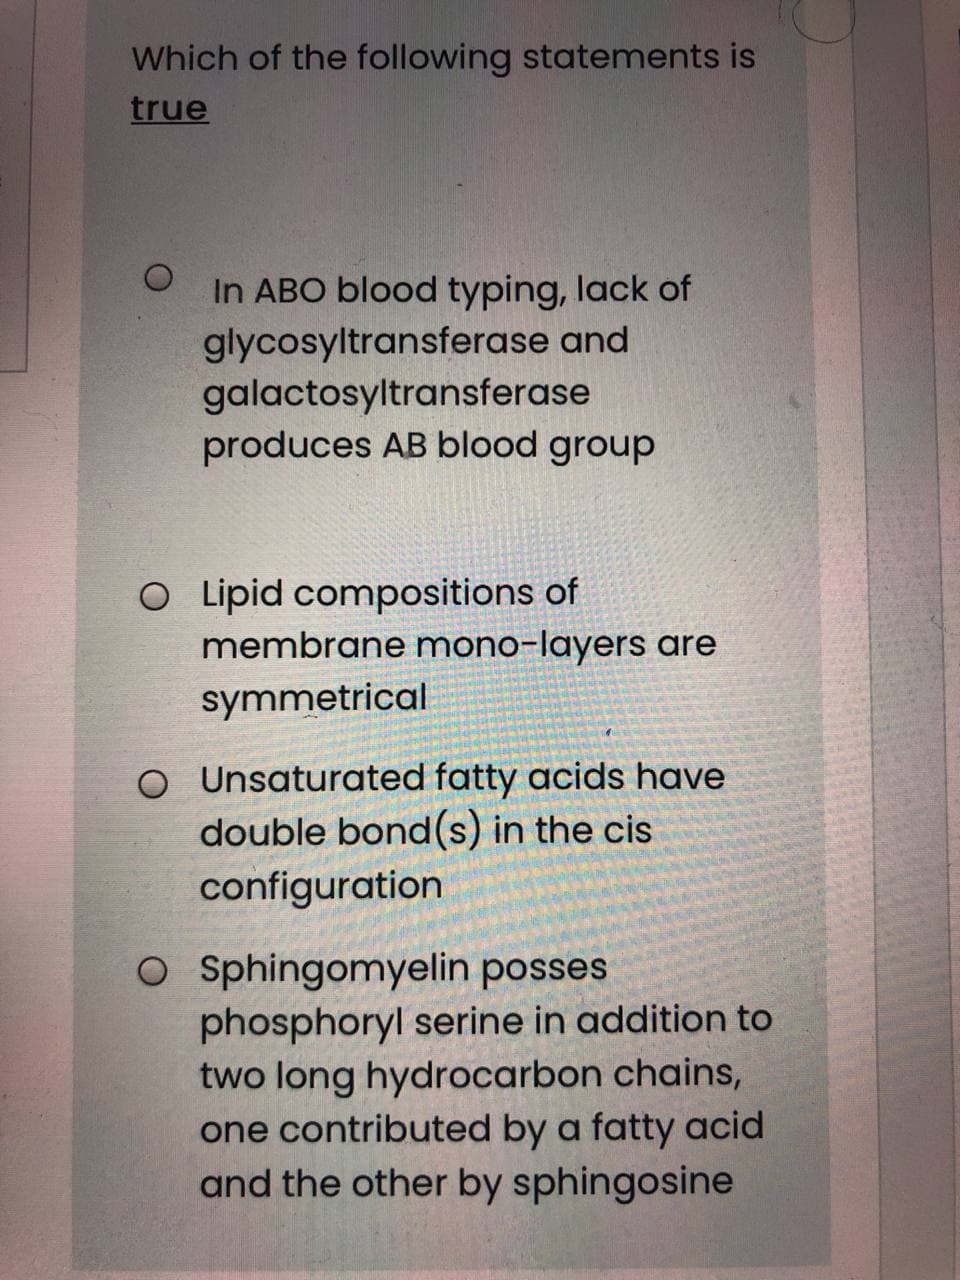 Which of the following statements is
true
In ABO blood typing, lack of
glycosyltransferase and
galactosyltransferase
produces AB blood group
O Lipid compositions of
membrane mono-layers are
symmetrical
O Unsaturated fatty acids have
double bond(s) in the cis
configuration
O Sphingomyelin posses
phosphoryl serine in addition to
two long hydrocarbon chains,
one contributed by a fatty acid
and the other by sphingosine
